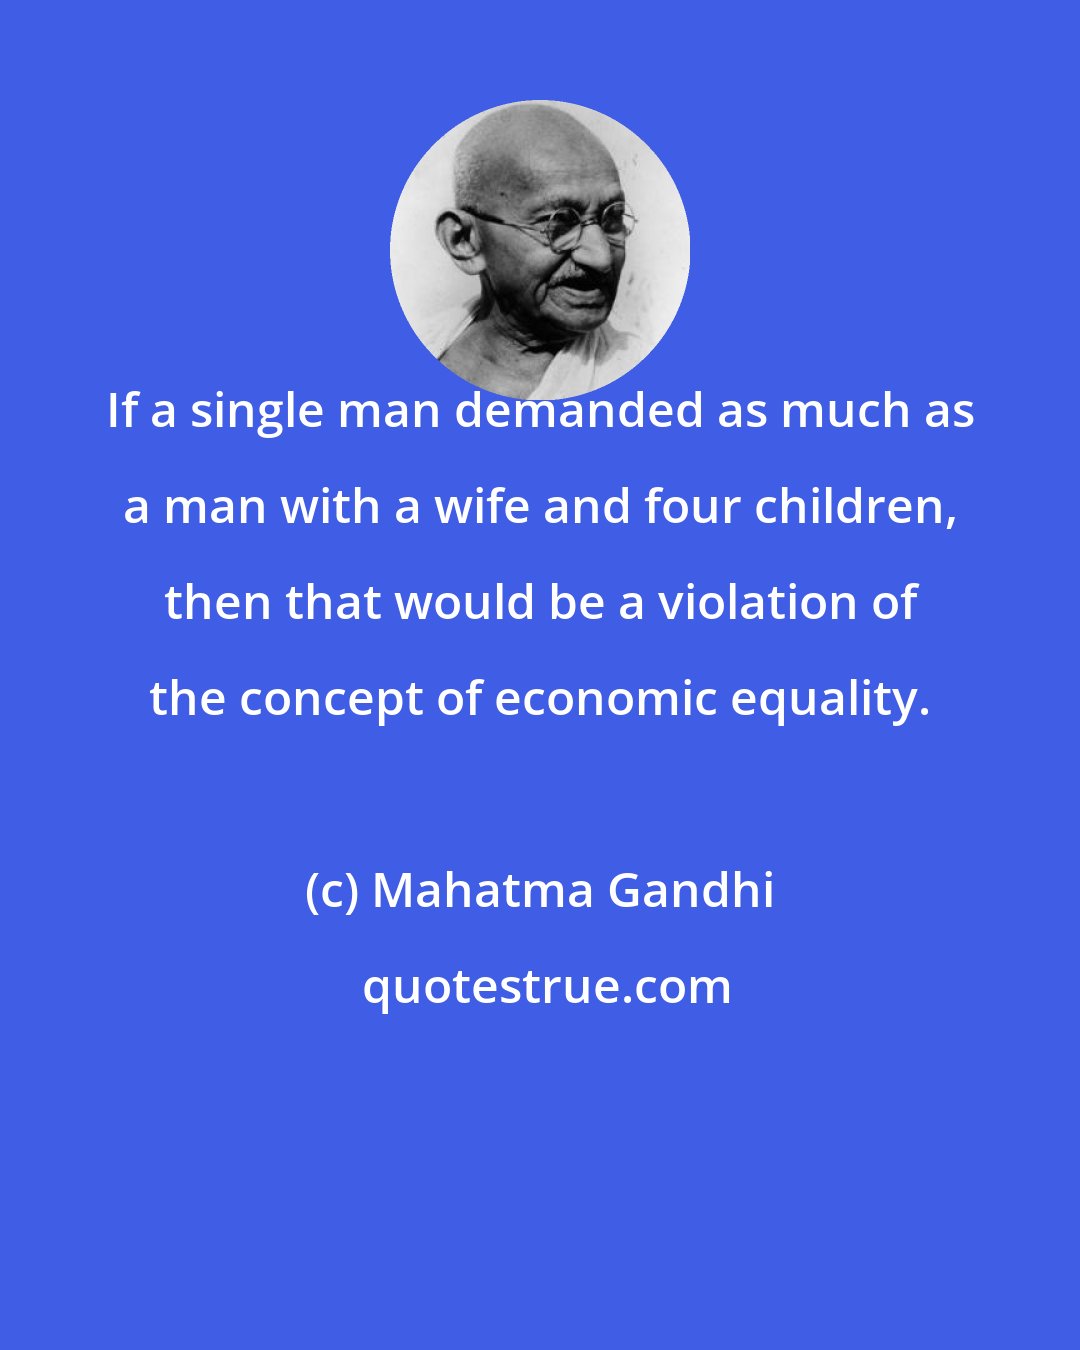 Mahatma Gandhi: If a single man demanded as much as a man with a wife and four children, then that would be a violation of the concept of economic equality.